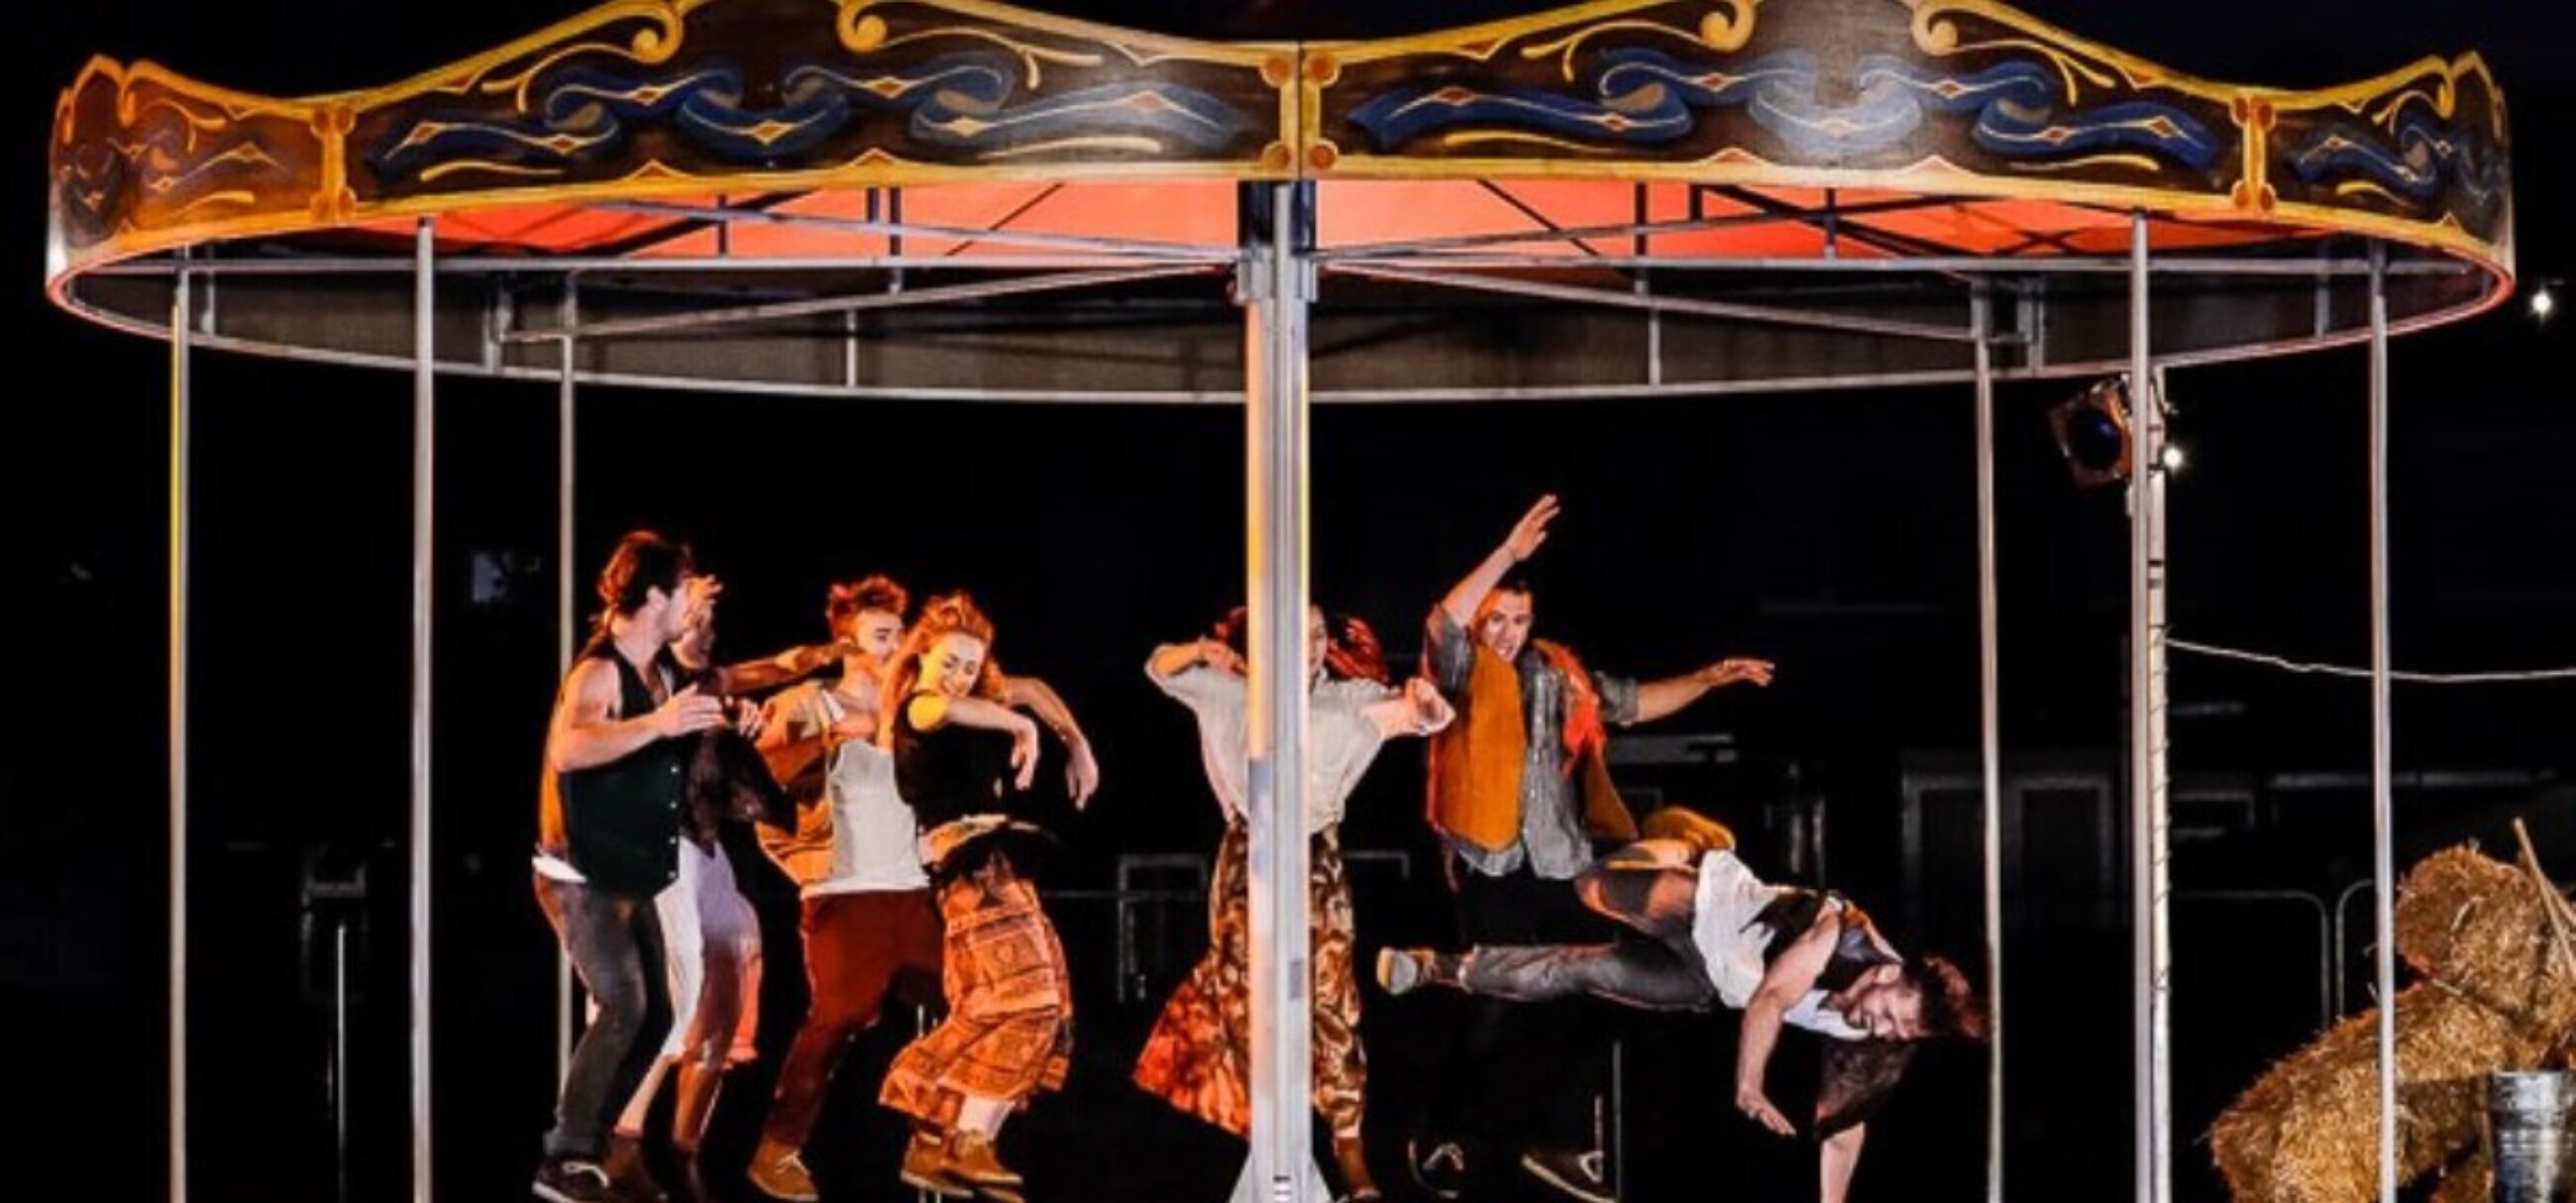 Couples in loose, bohemian, gypsy like clothing dance on a small fairground carousel.